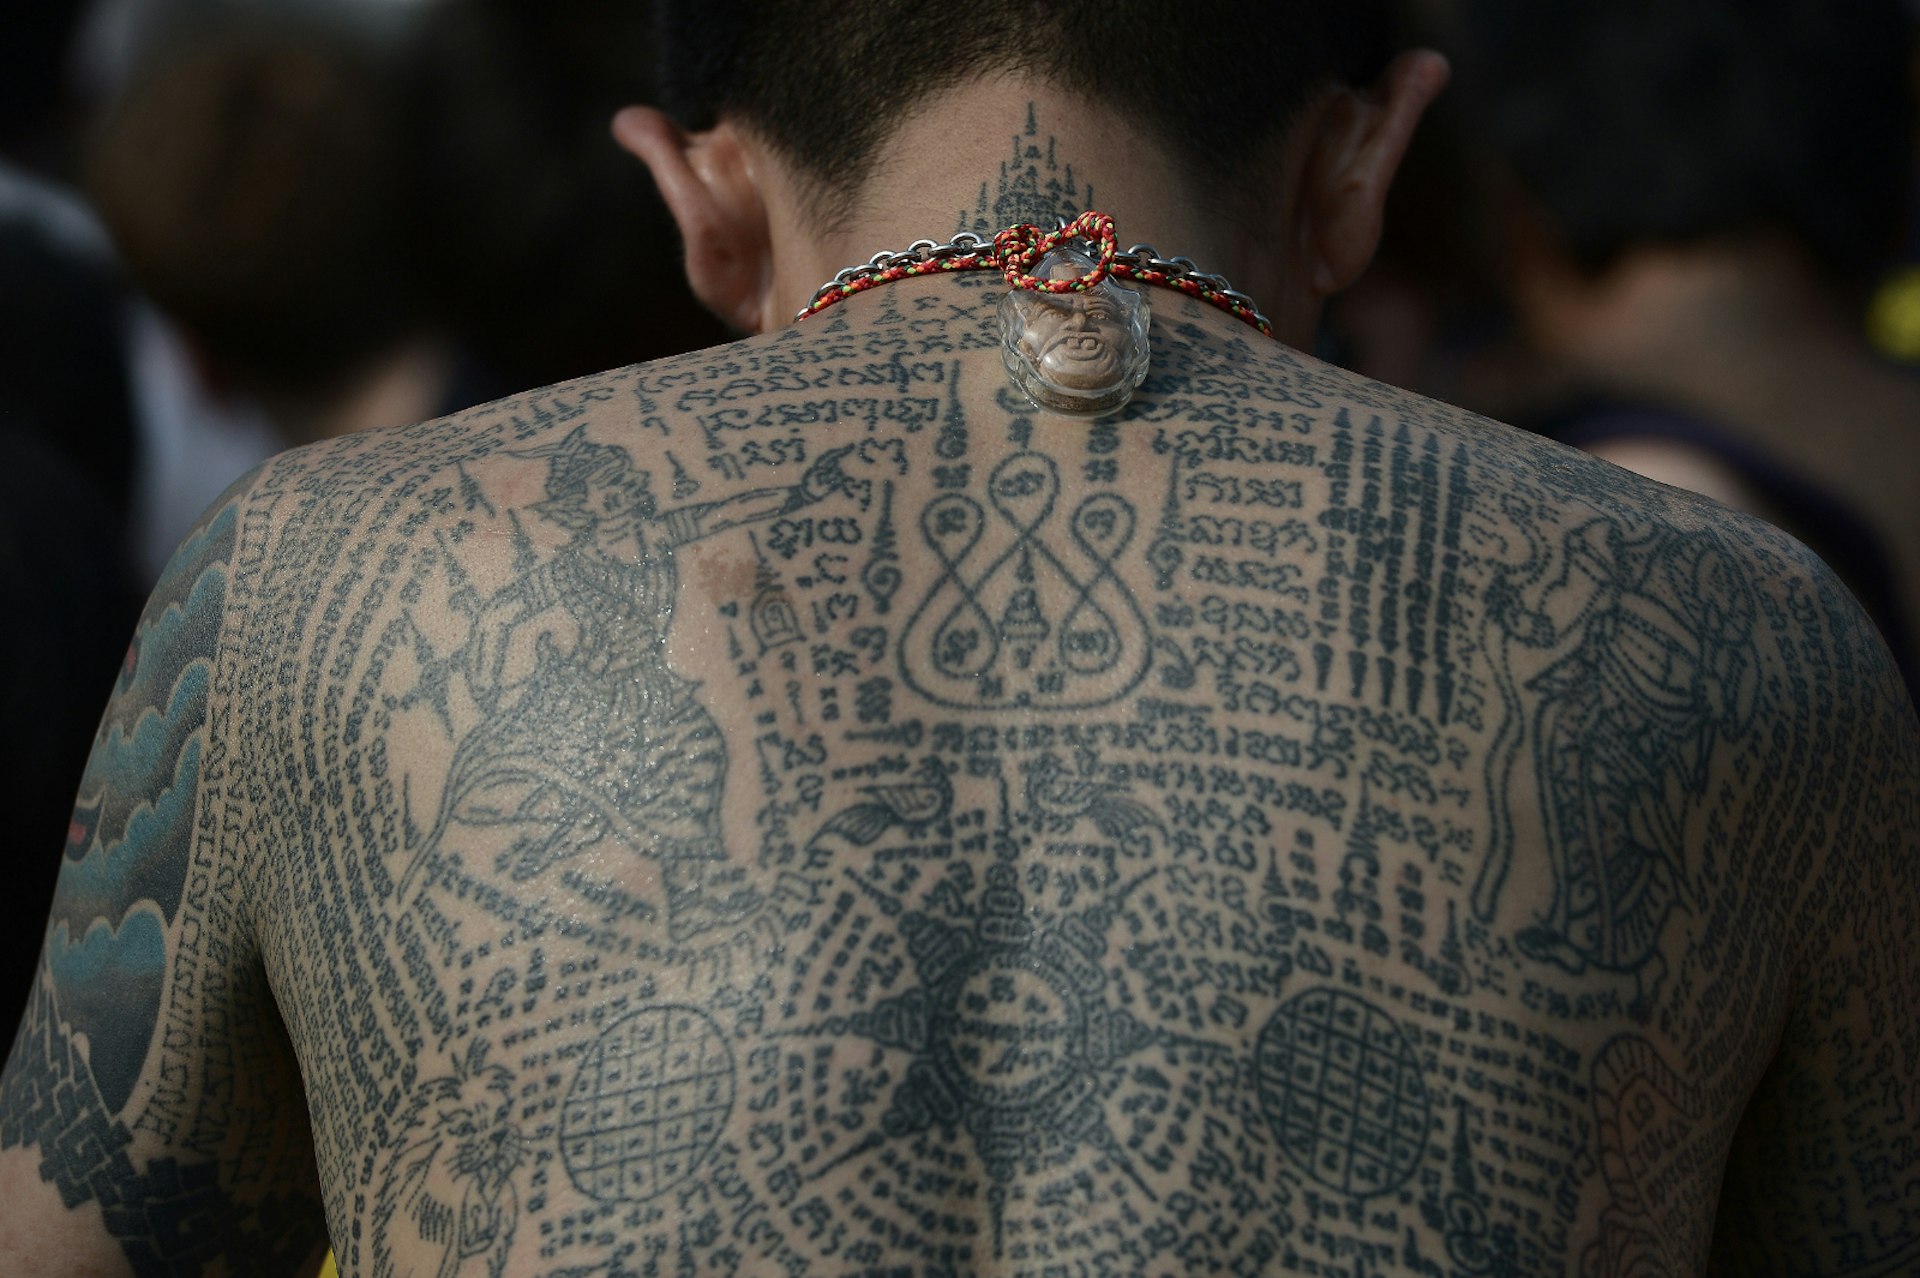  A heavily tattooed Buddhist devotee sits among the crowd during an annual tattoo festival, at Wat Bang Phra temple in Nakhon Chaisi west of Bangkok © Christophe Archambault / AFP / Getty Images 